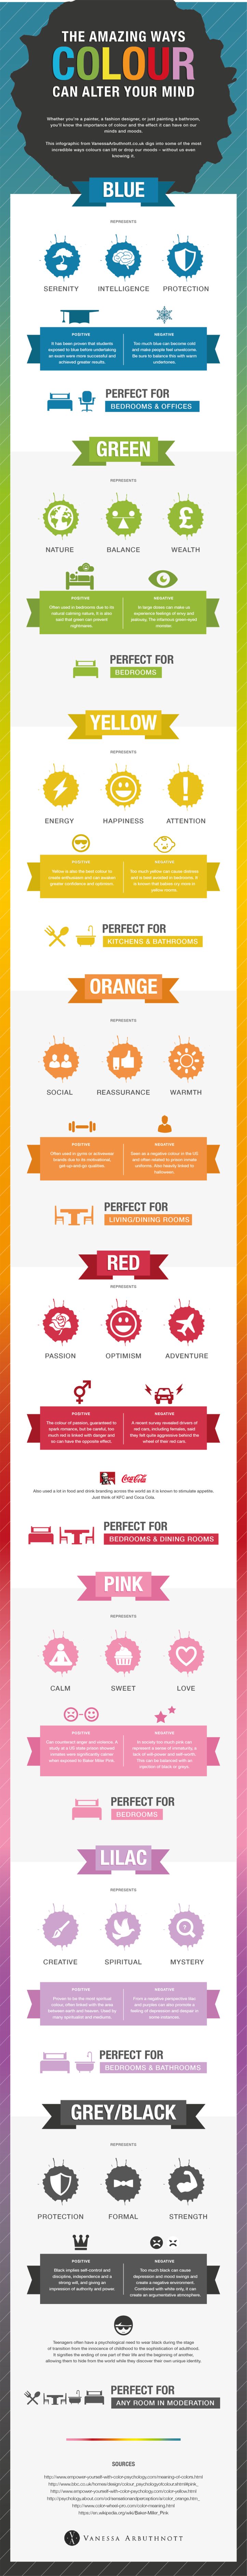 The Amazing Ways Colour Can Alter Your Mind - Visualistan